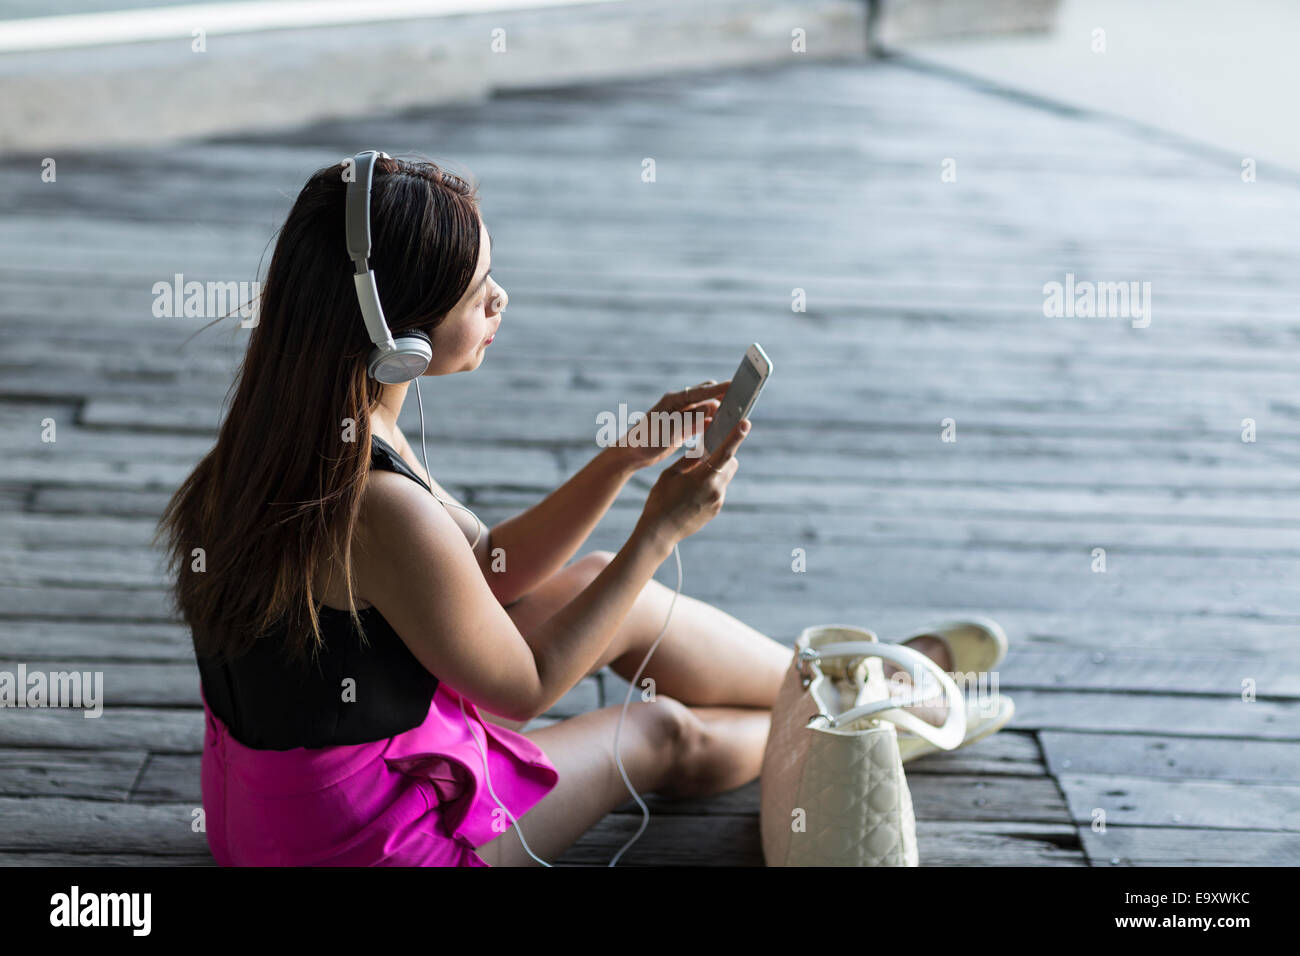 A young Asian woman consuming content on her smartphone outdoors Stock Photo